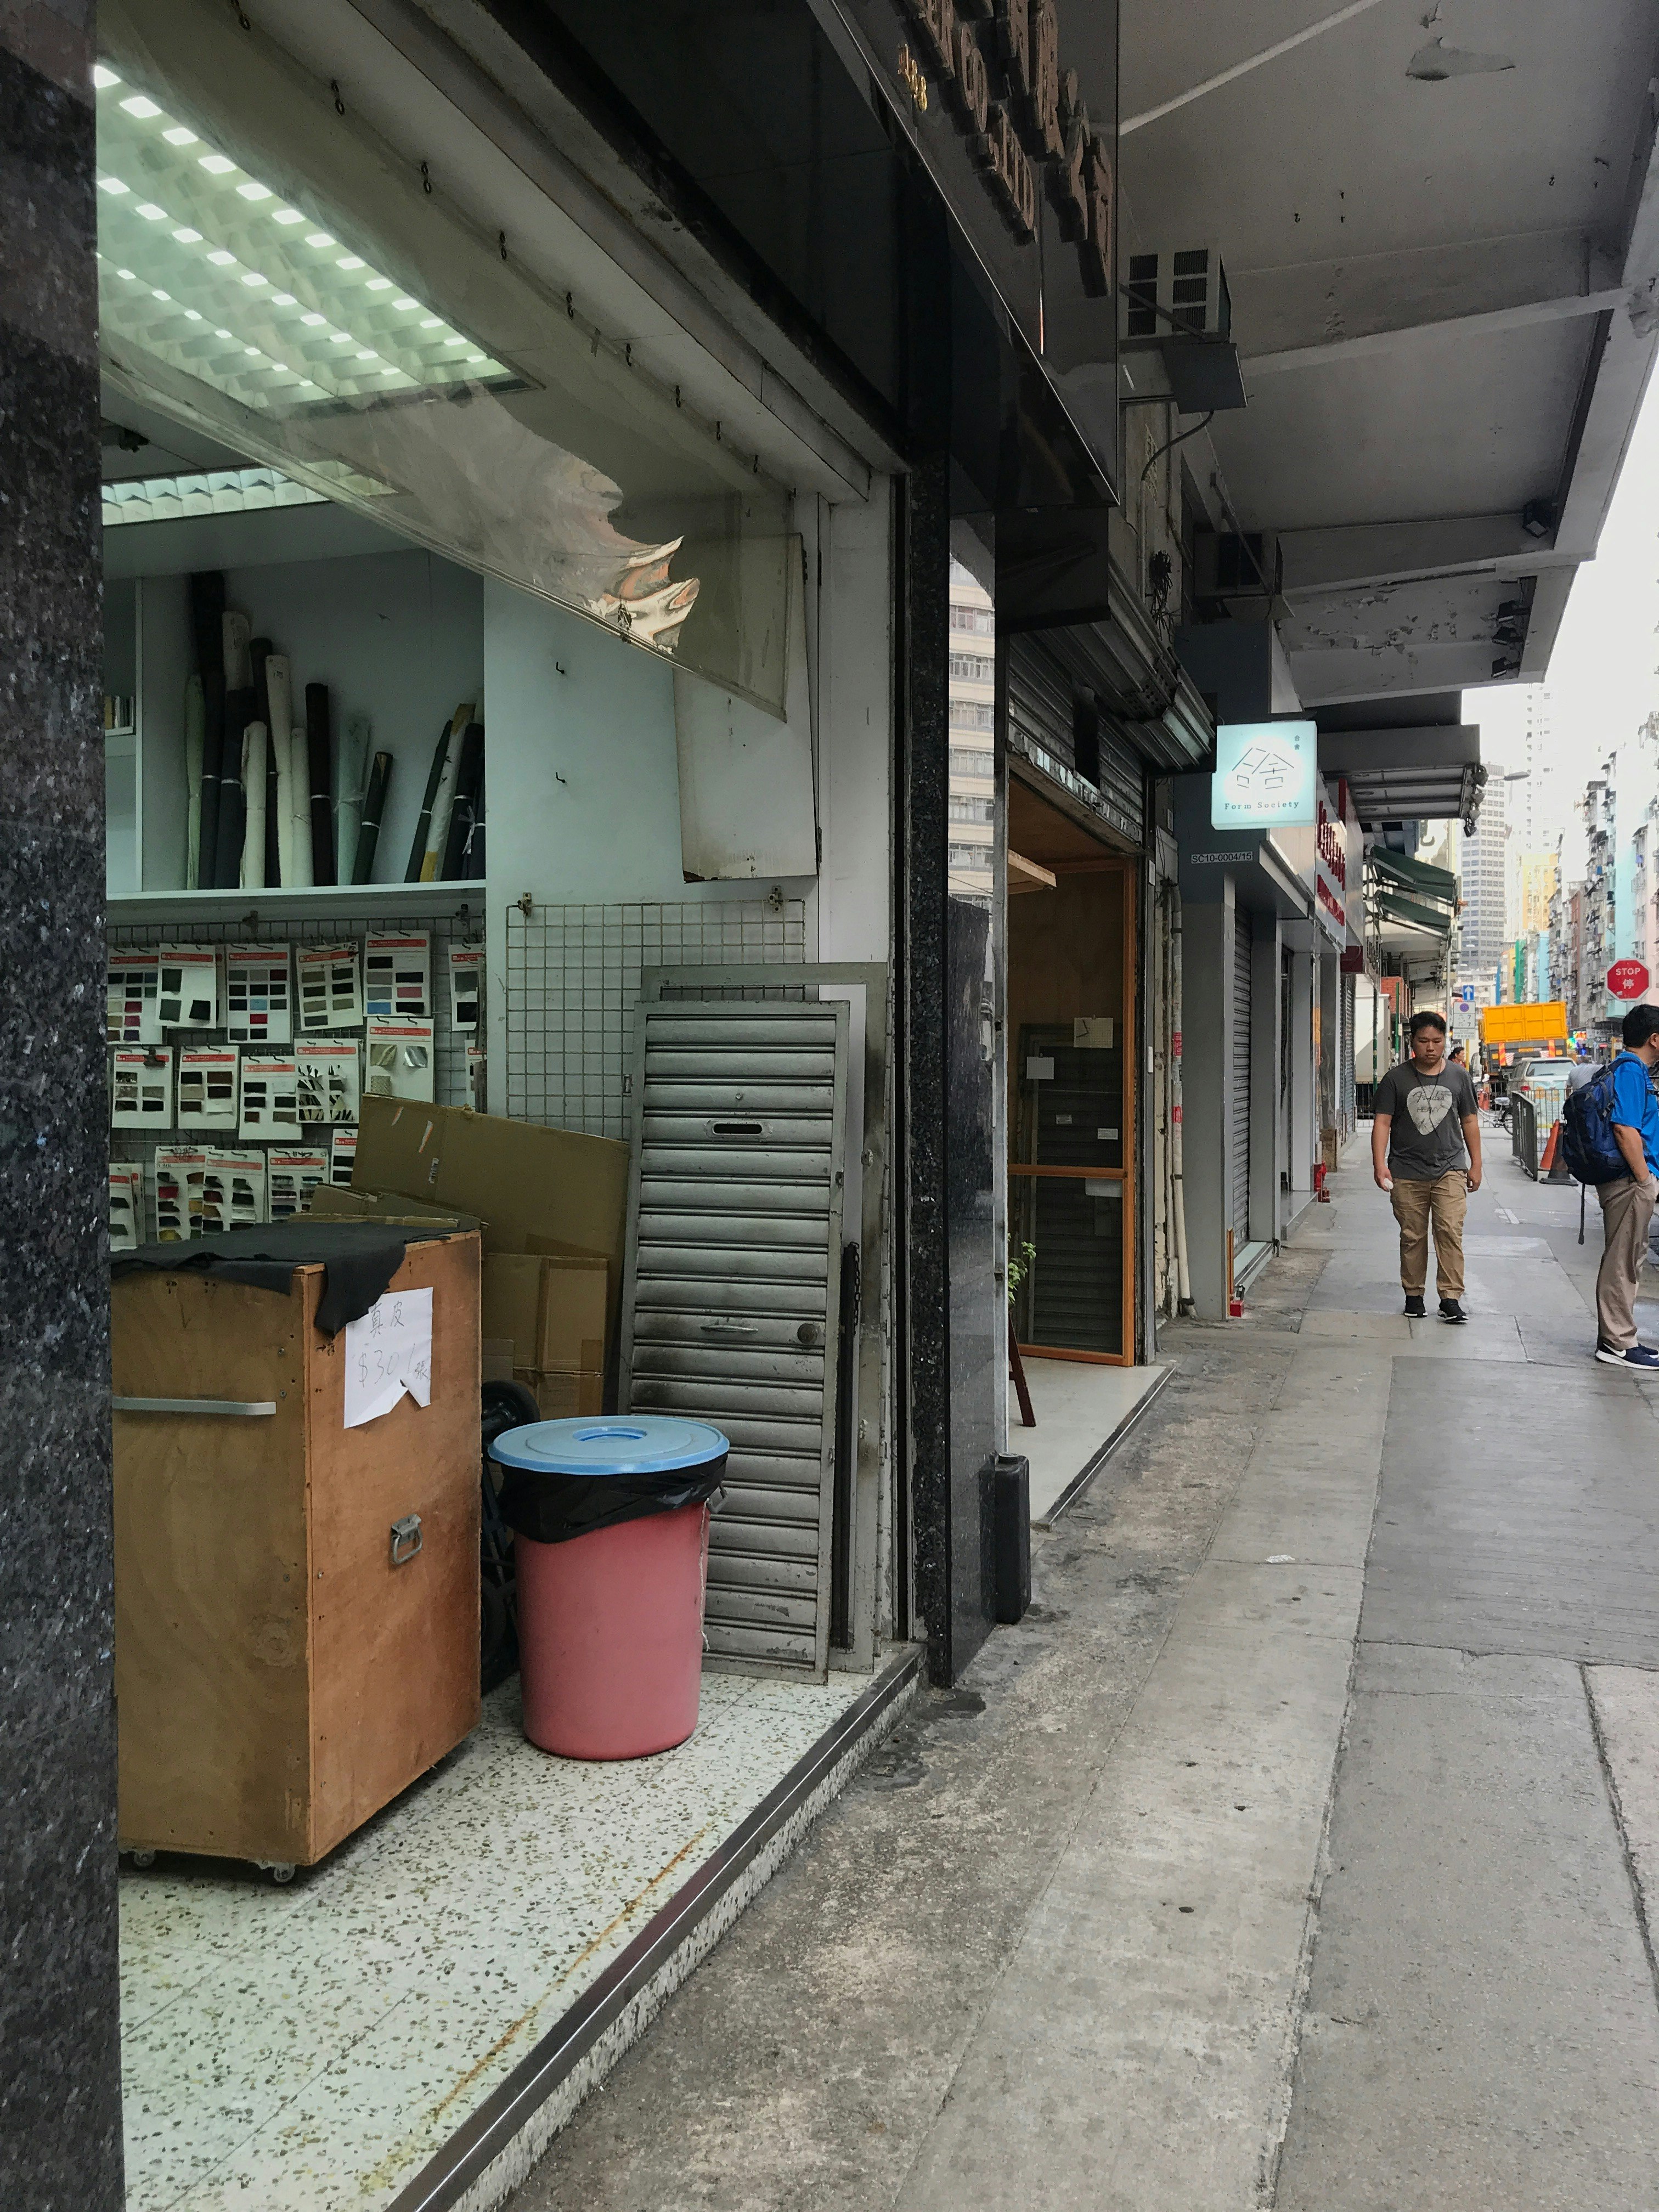 A street front of an open fabric store in Hong Kong, with some figures walking by on the street.